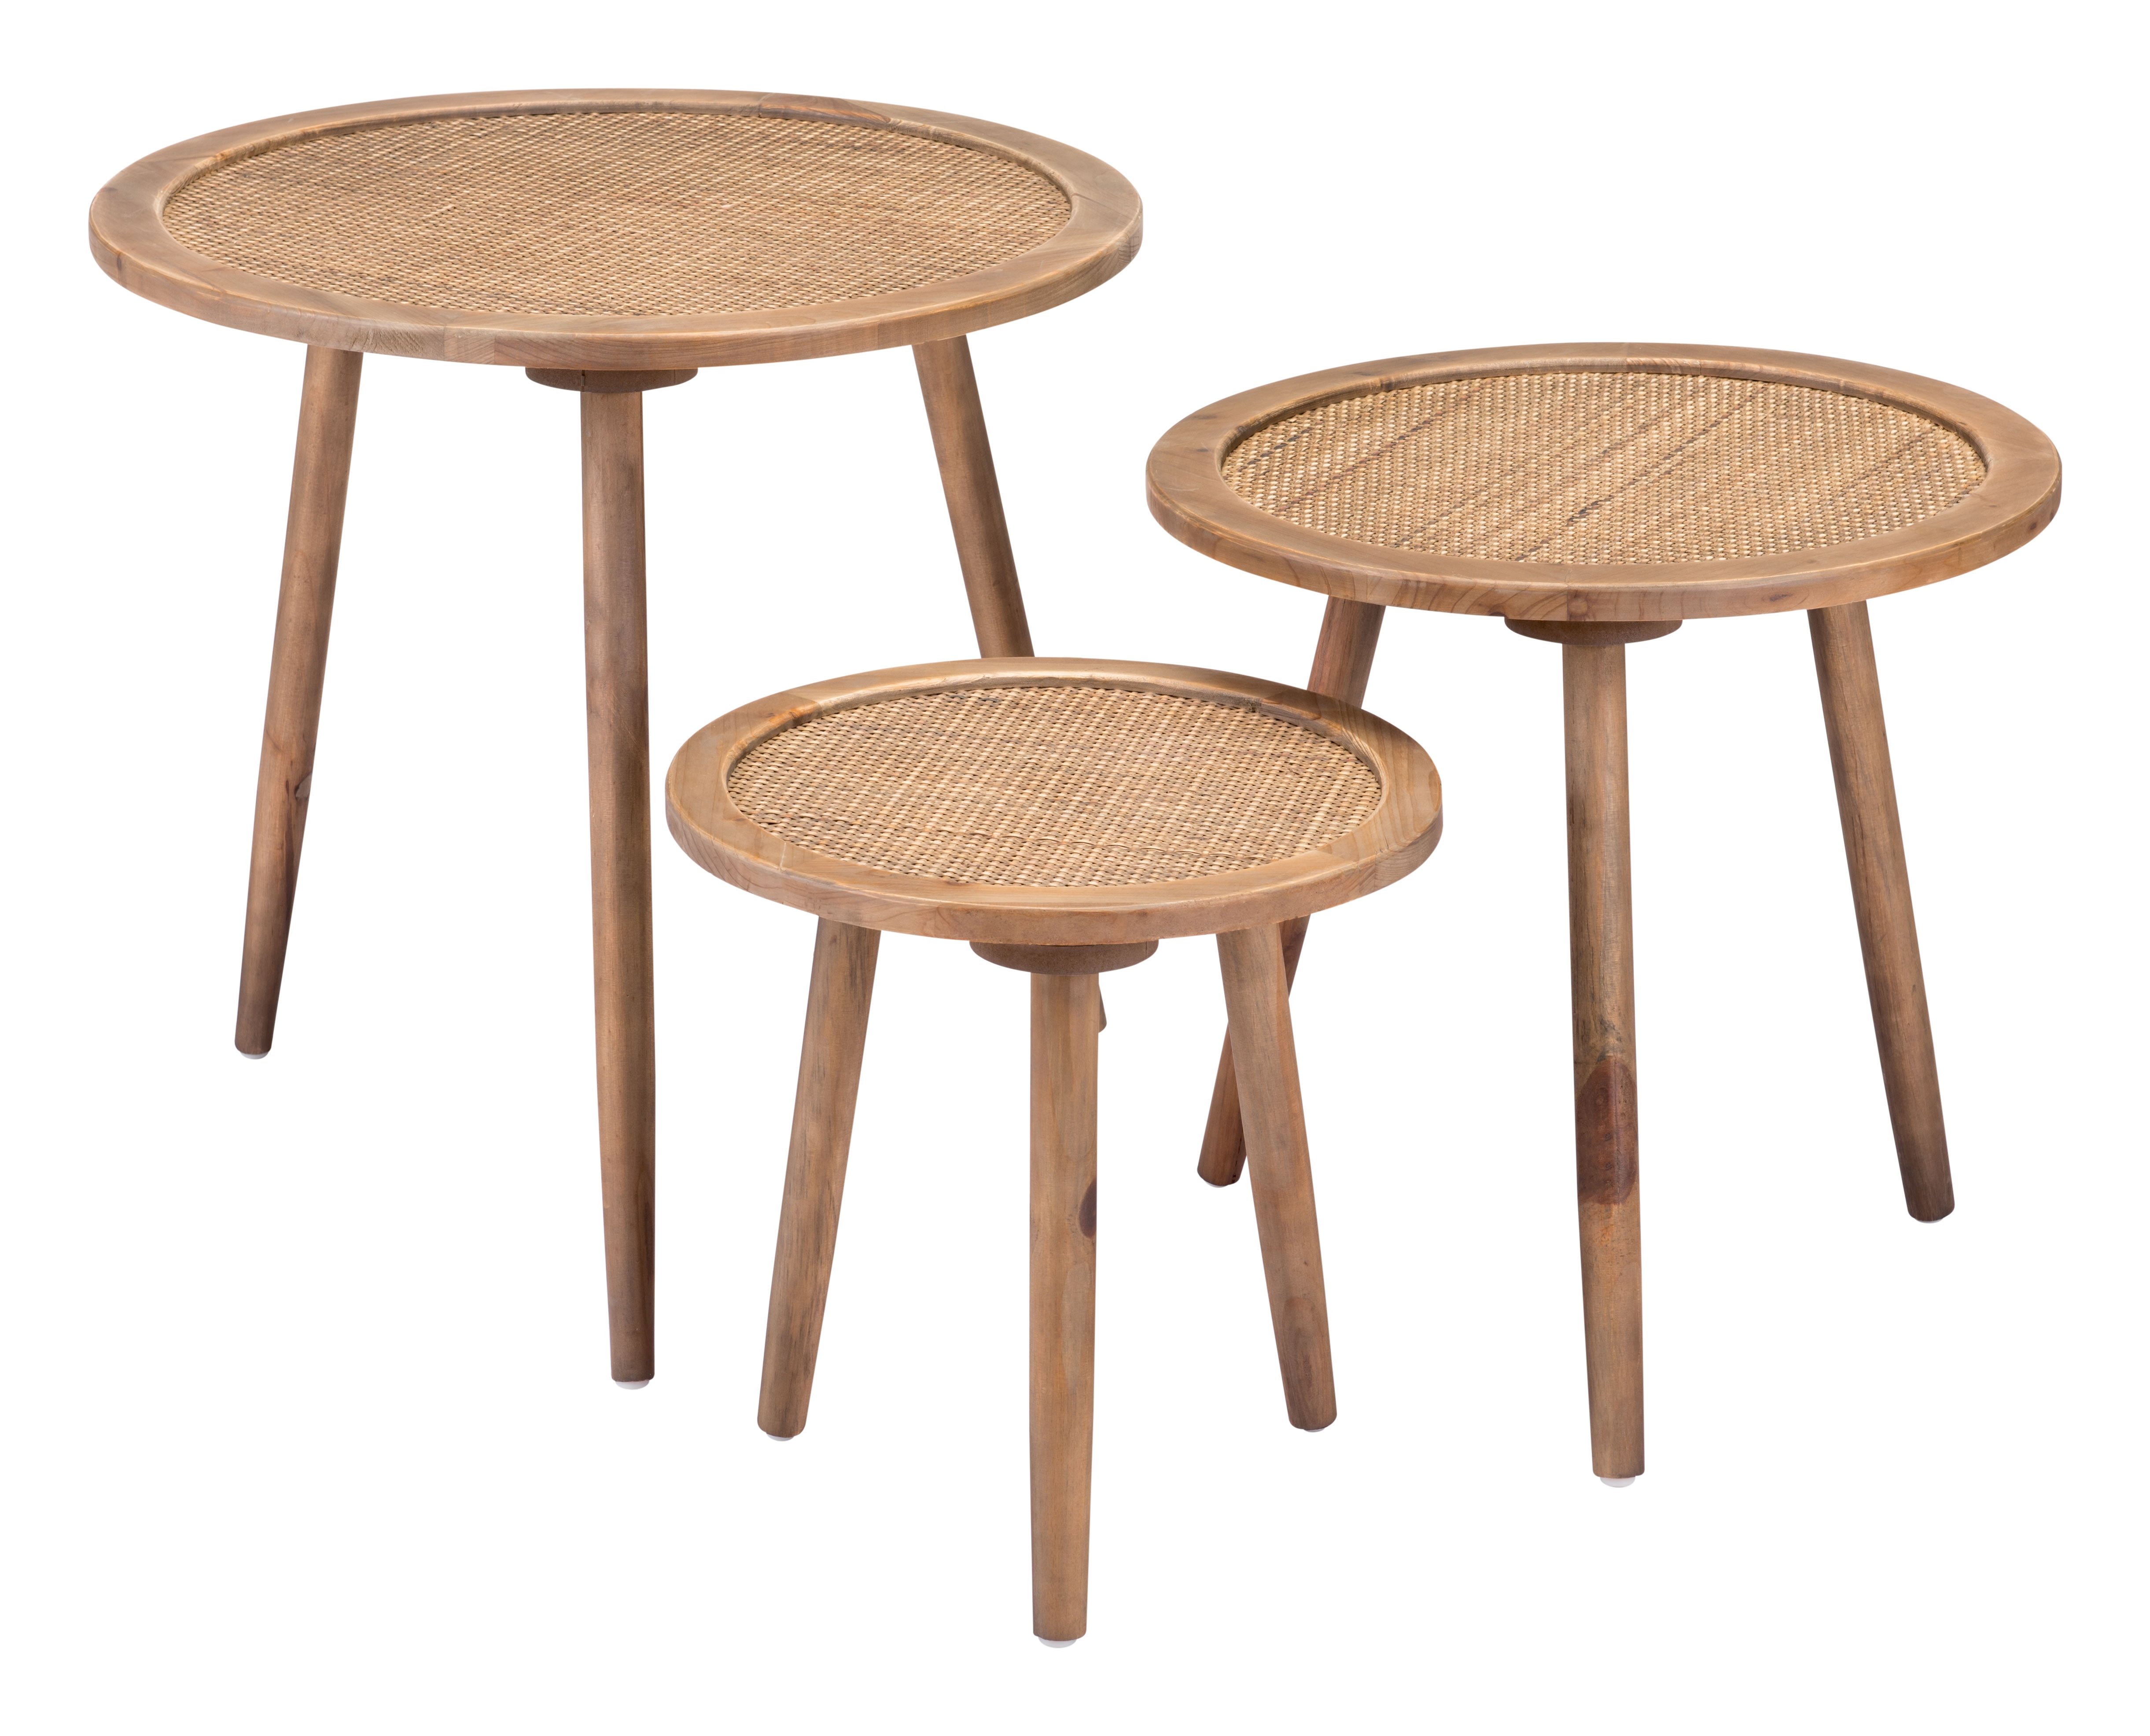 Tobyn Accent Tables, Set of 3 - Image 1